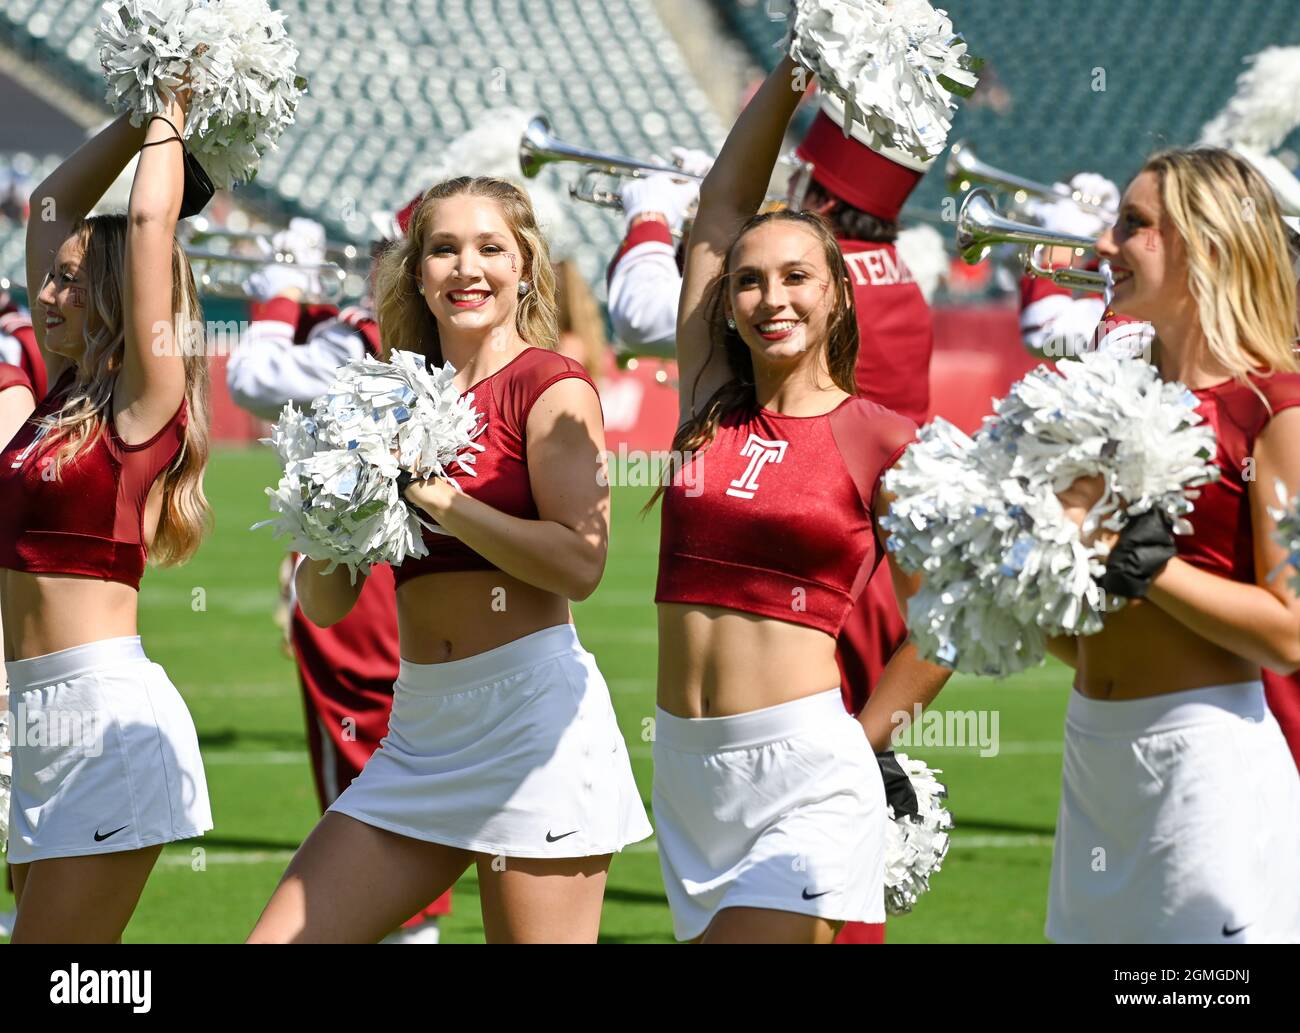 philadelphia-pennsylvania-usa-18th-sep-2021-september-18-2021-philadelphia-pa-temple-cheerleaders-in-action-before-the-game-between-temple-and-boston-college-at-lincoln-financial-field-credit-image-ricky-fitchettzuma-press-wire-2GMGDNJ.jpg